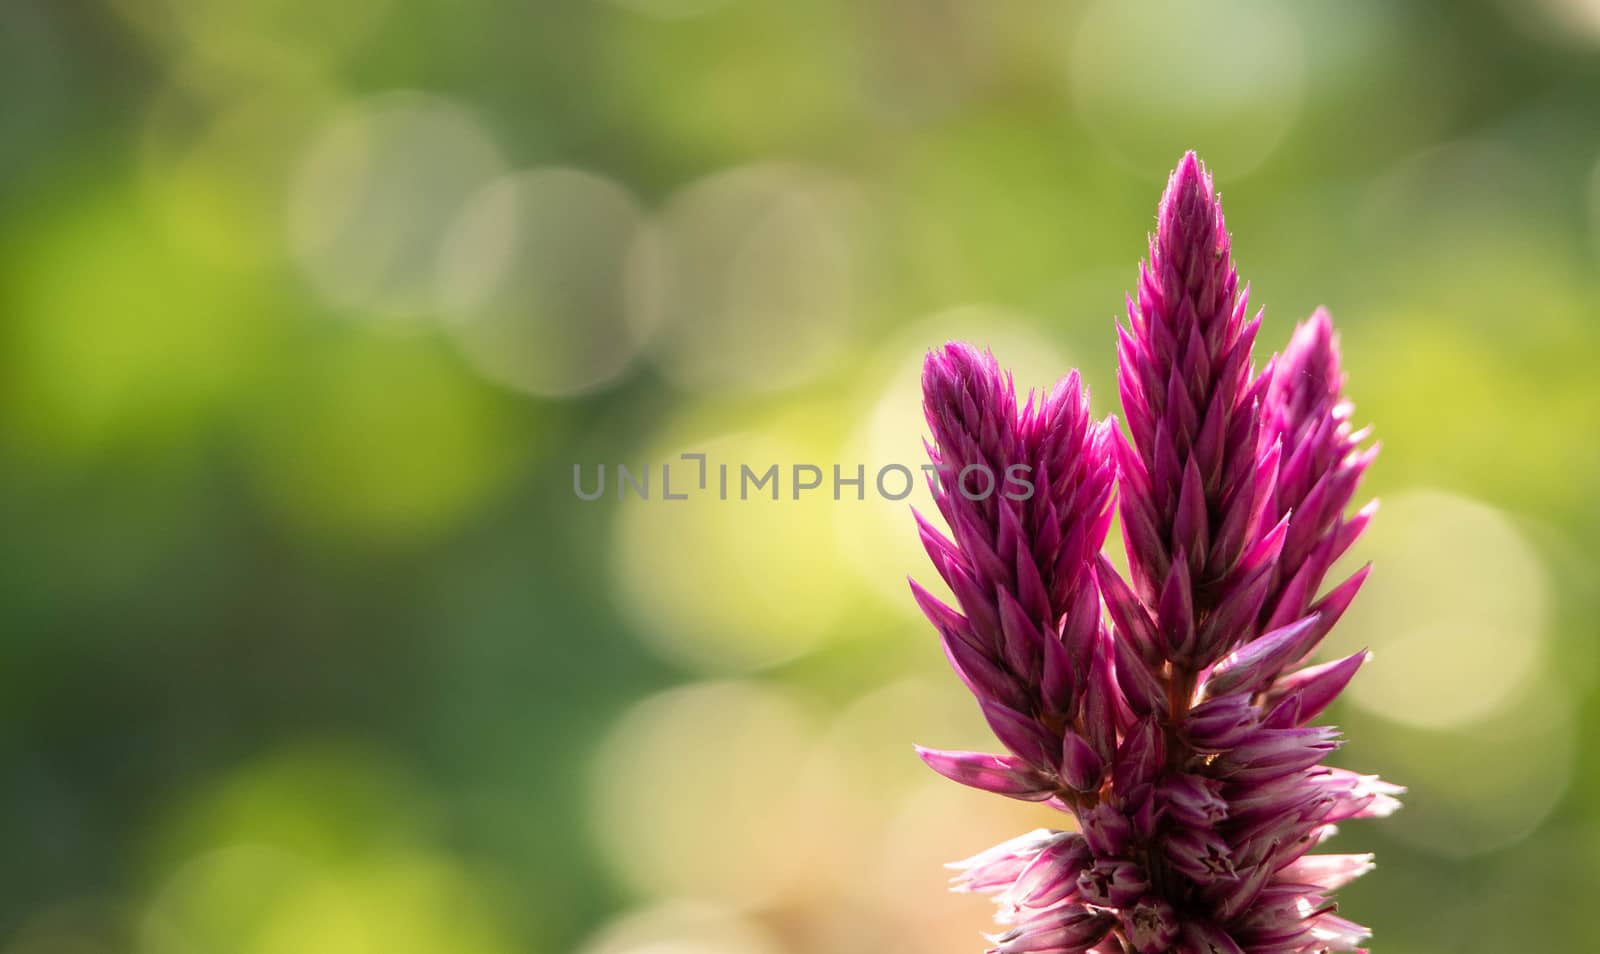 A beautiful purple cockscomb flower (celosia argentea) or Chinese Wool flower, herbaceous plant growing outdoor in the sun on nature blurred background. by TEERASAK